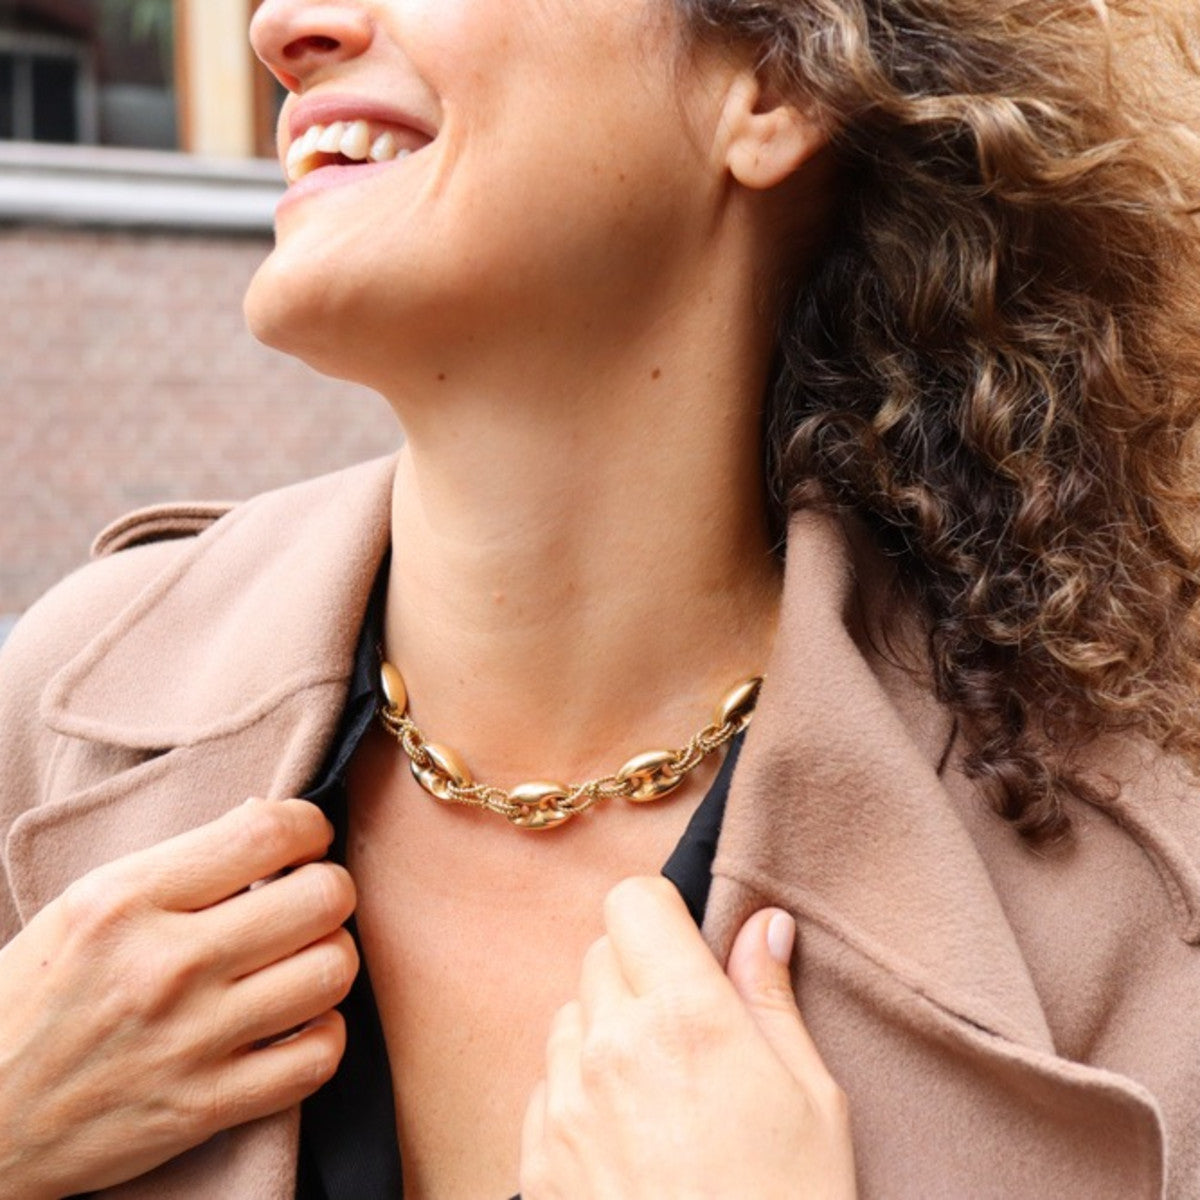 Post-1980s 18KT Yellow Gold Necklace worn on neck